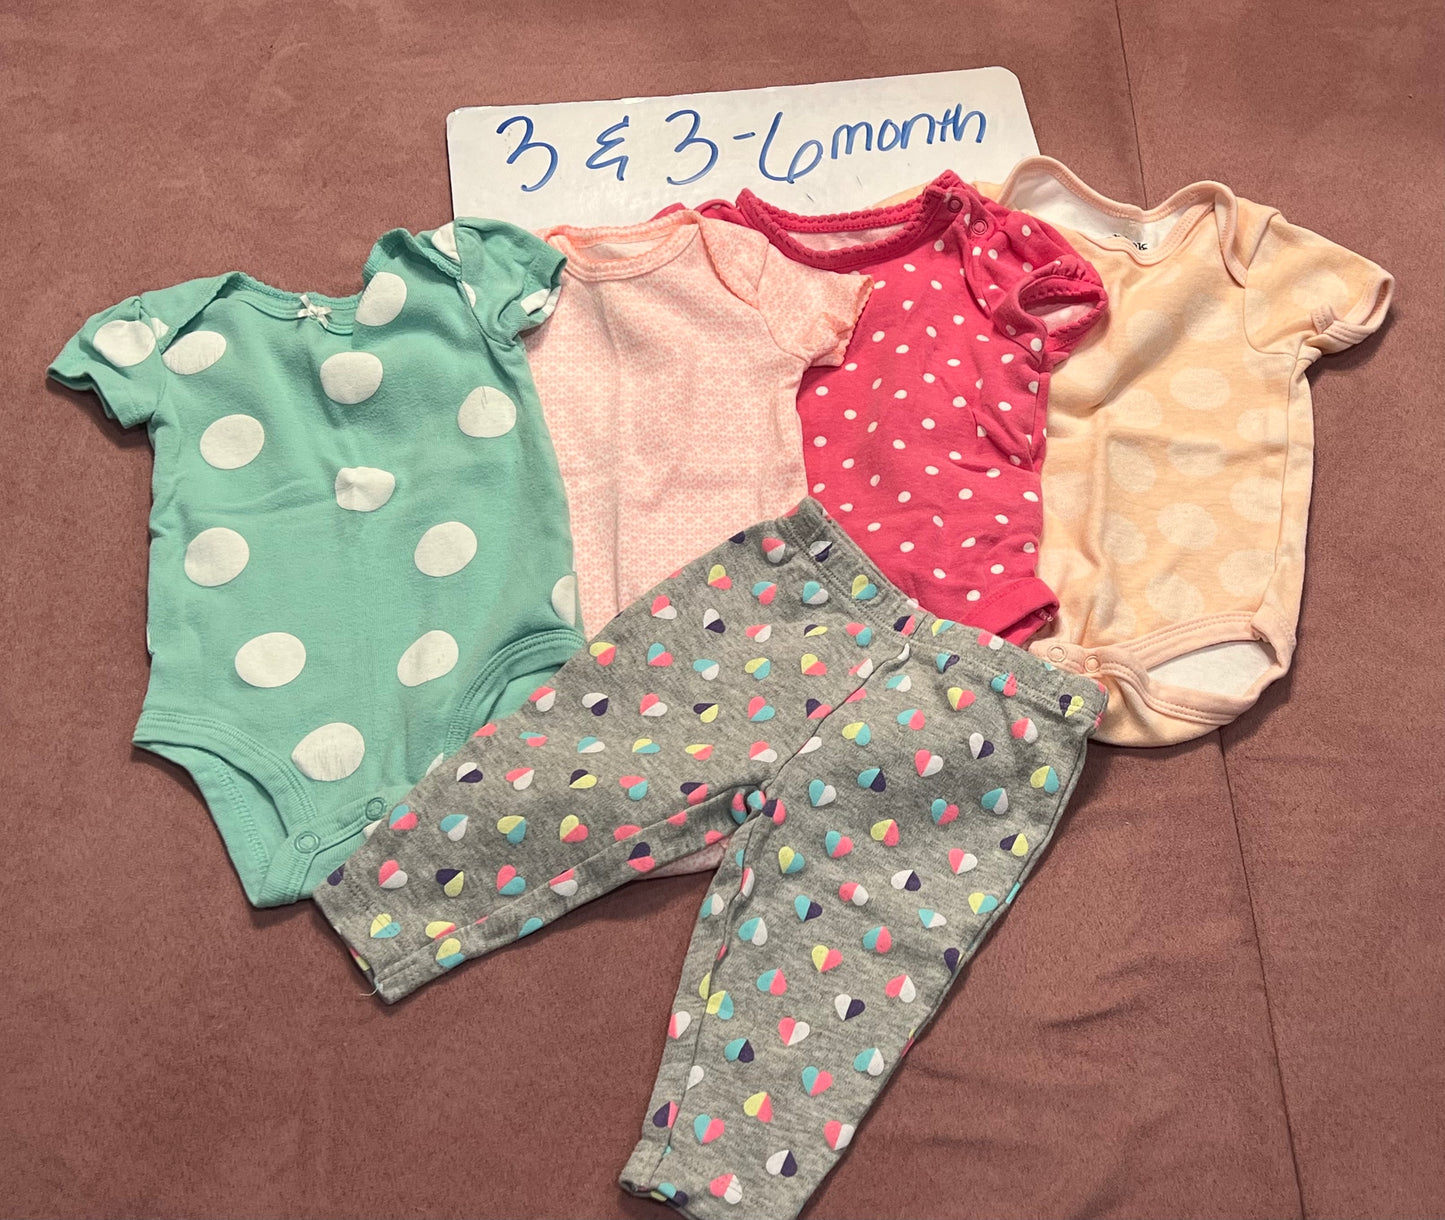 3 and 3-6 month Girls bundle (5)